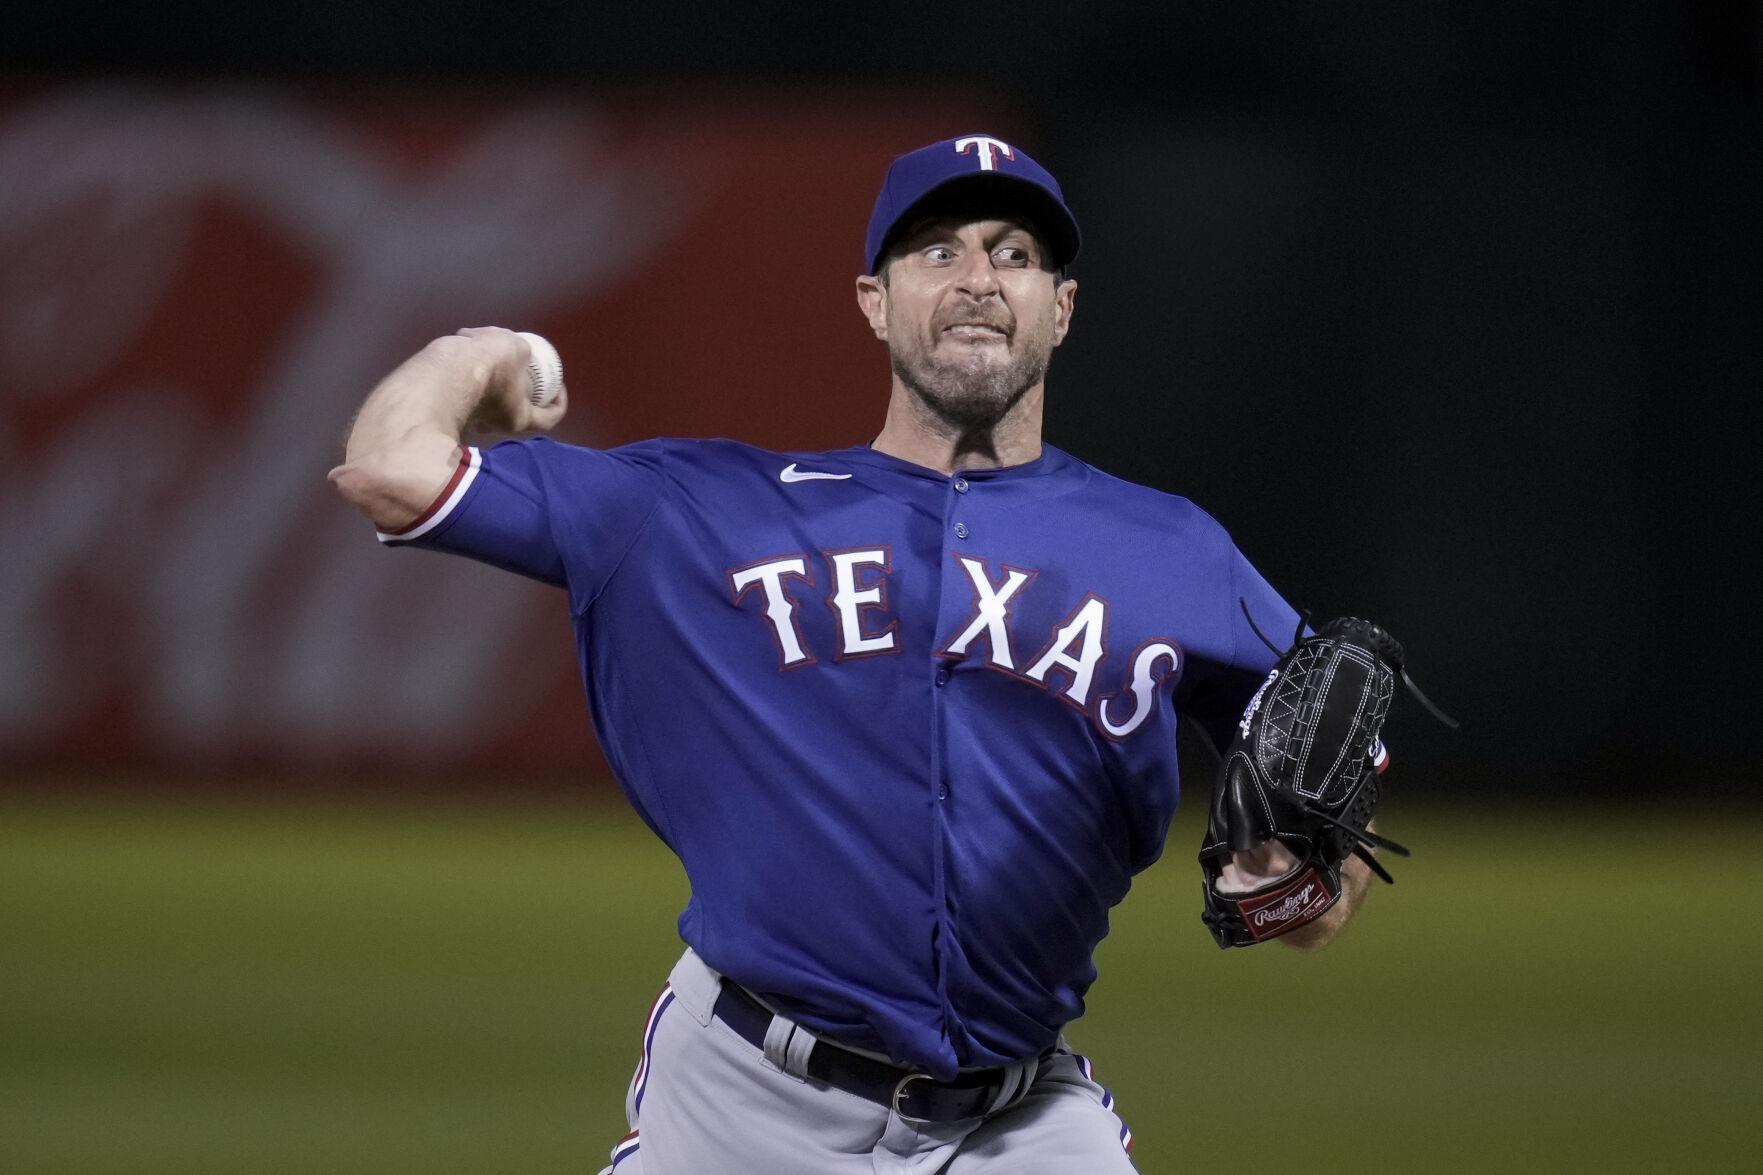 Eovaldi wins 6th straight decision, Seager has 4 RBIs, Rangers